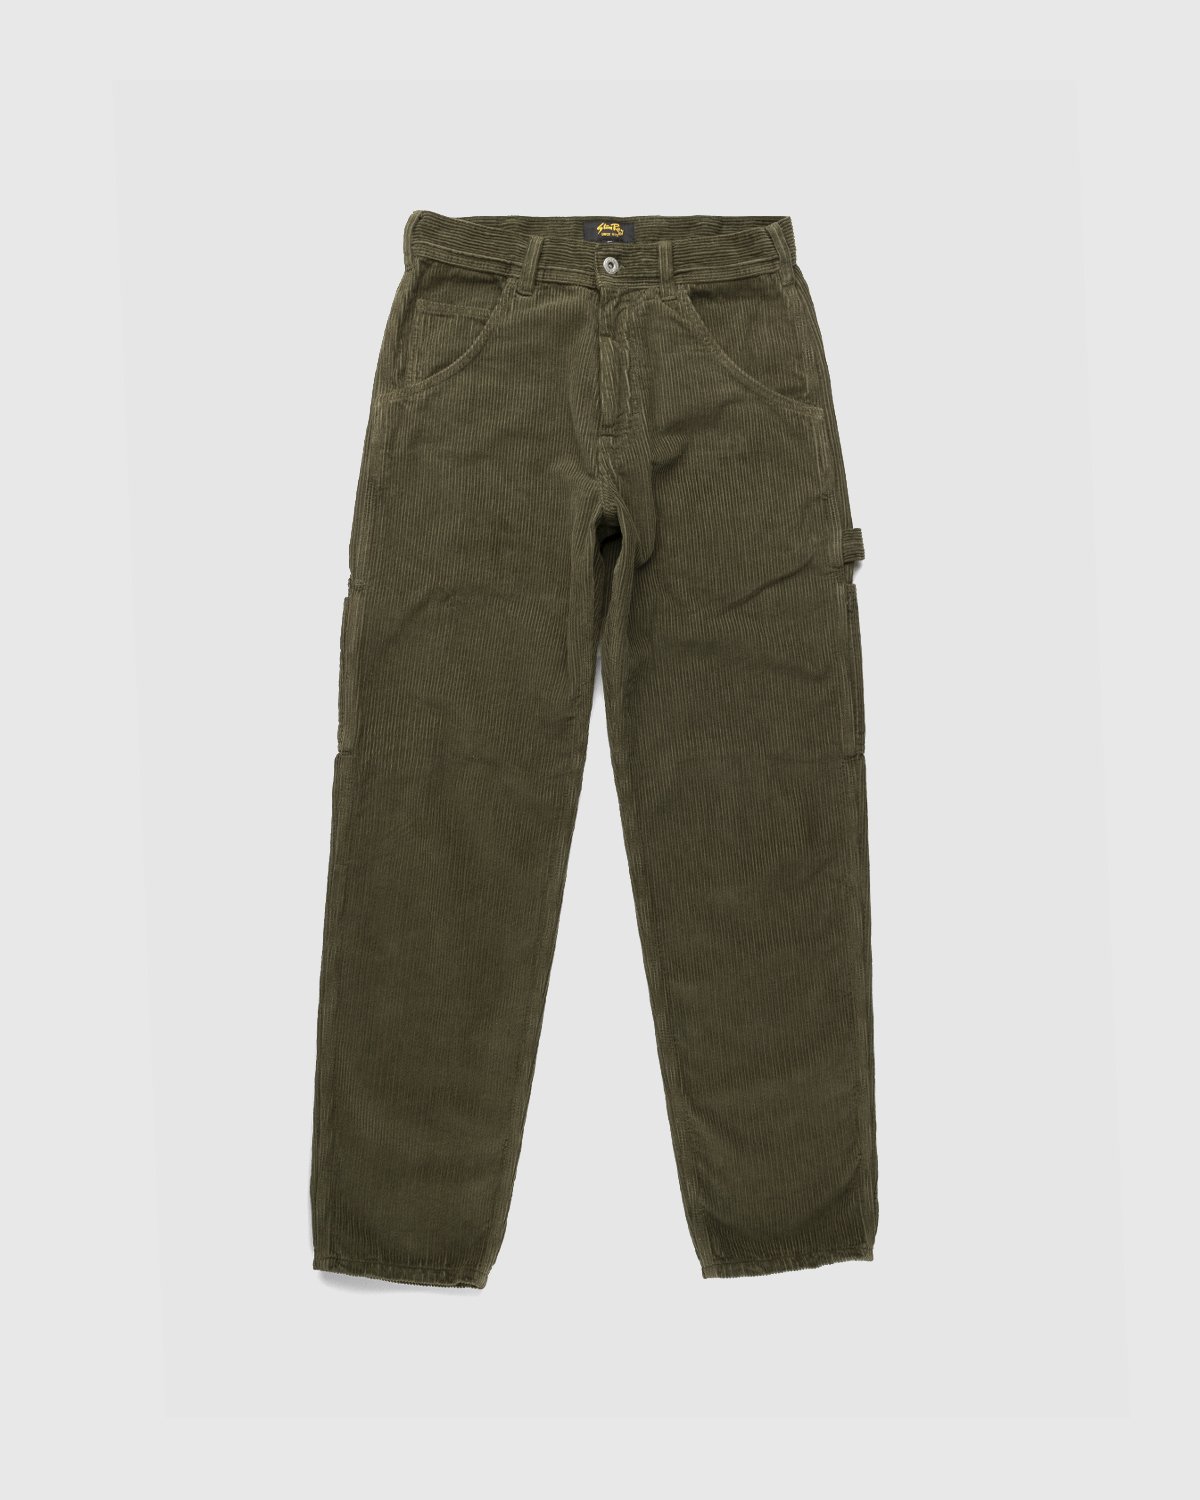 Stan Ray - 80s Painter Pant Olive Cord - Clothing - Green - Image 1